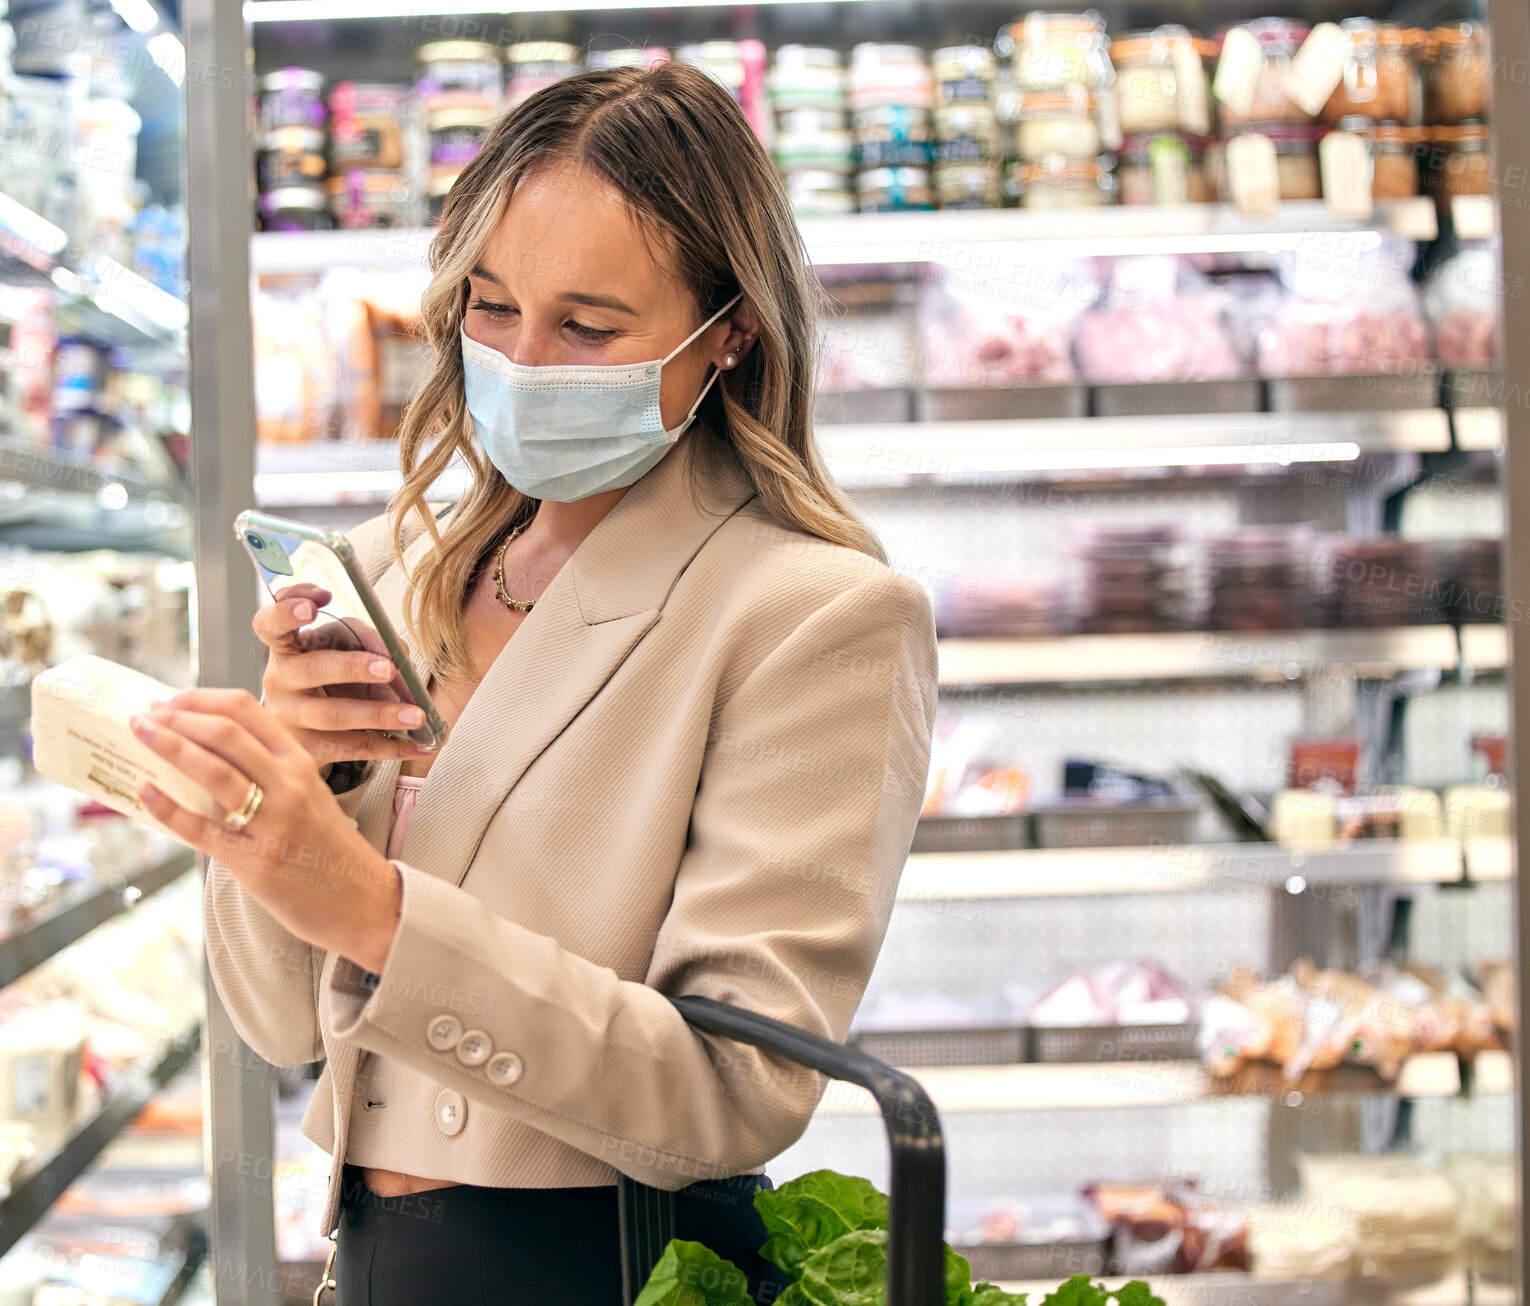 Buy stock photo Grocery store, woman covid mask and phone food ingredient check of a retail customer. Groceries shop of a person looking at a mobile app for a healthy diet label shopping in a supermarket checking